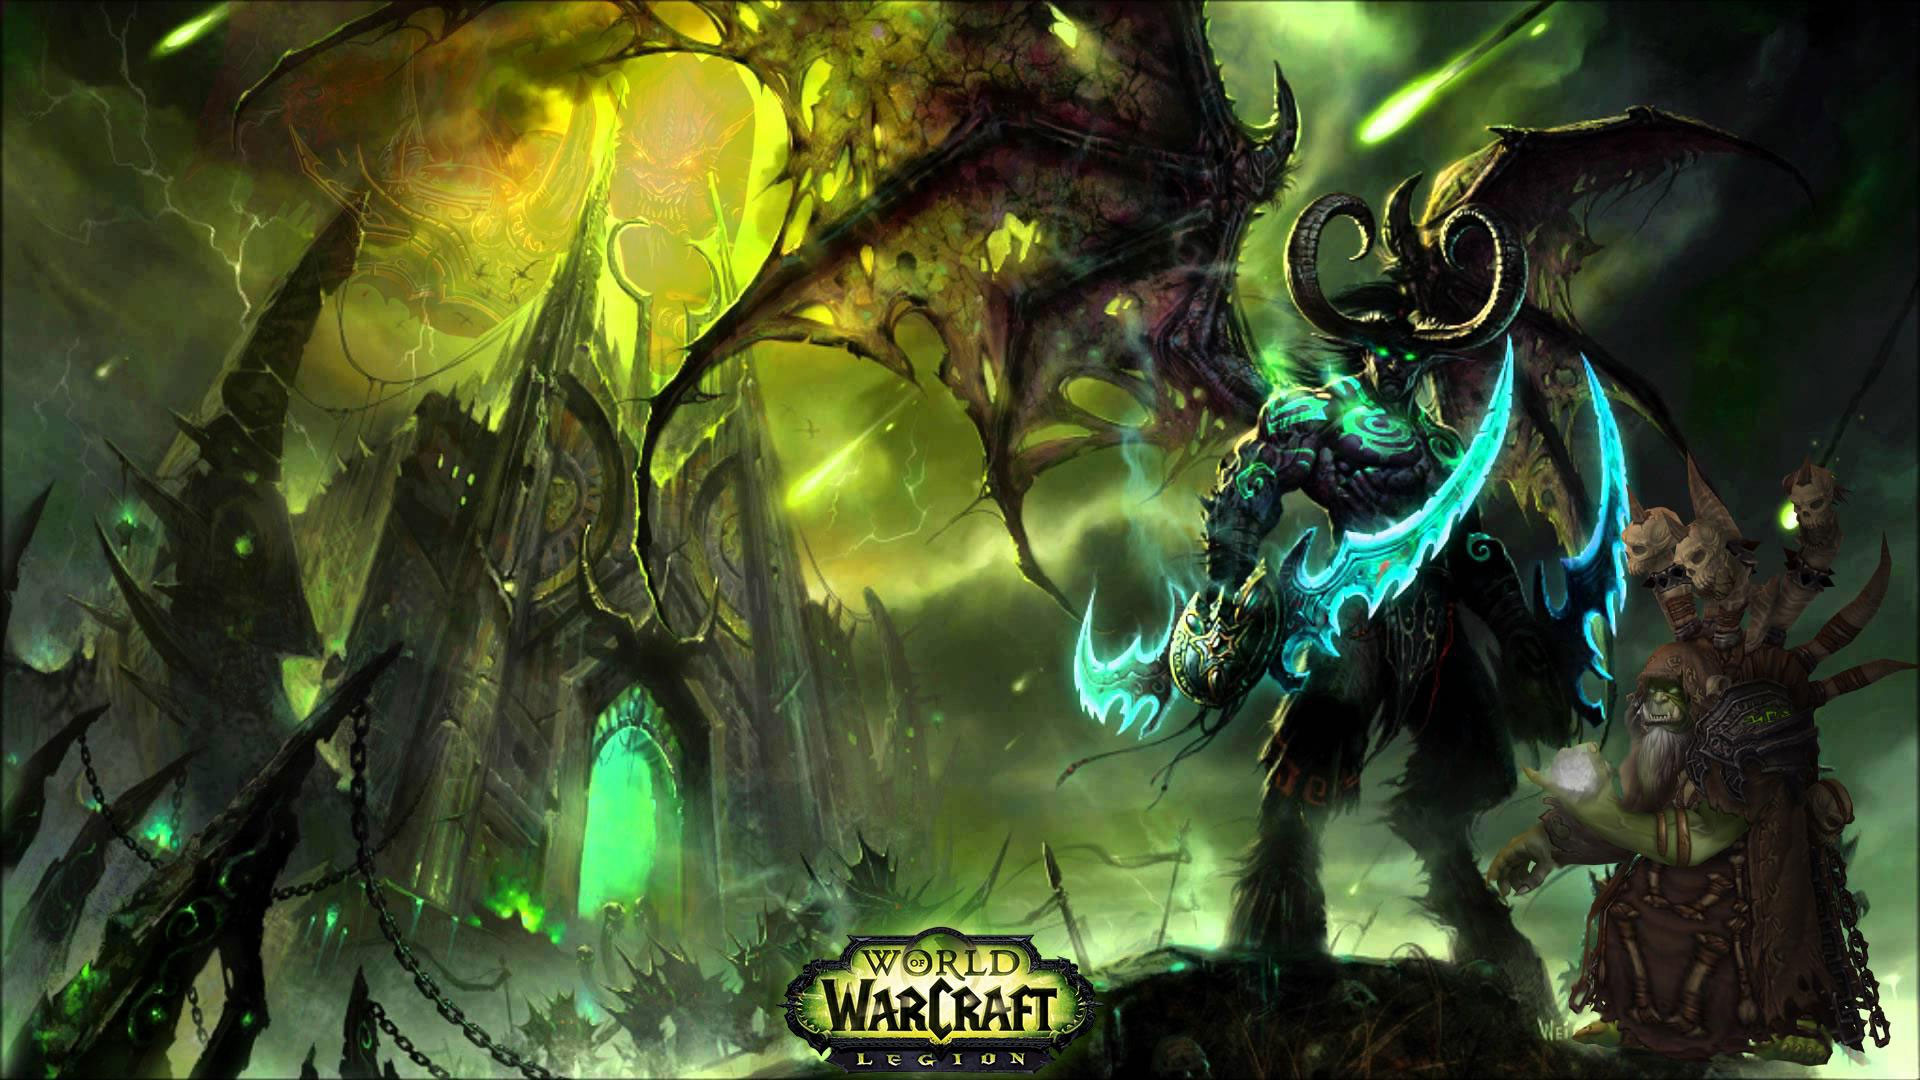 1920x1080 ... World of Warcraft: Legion Wallpapers, Pictures, ...